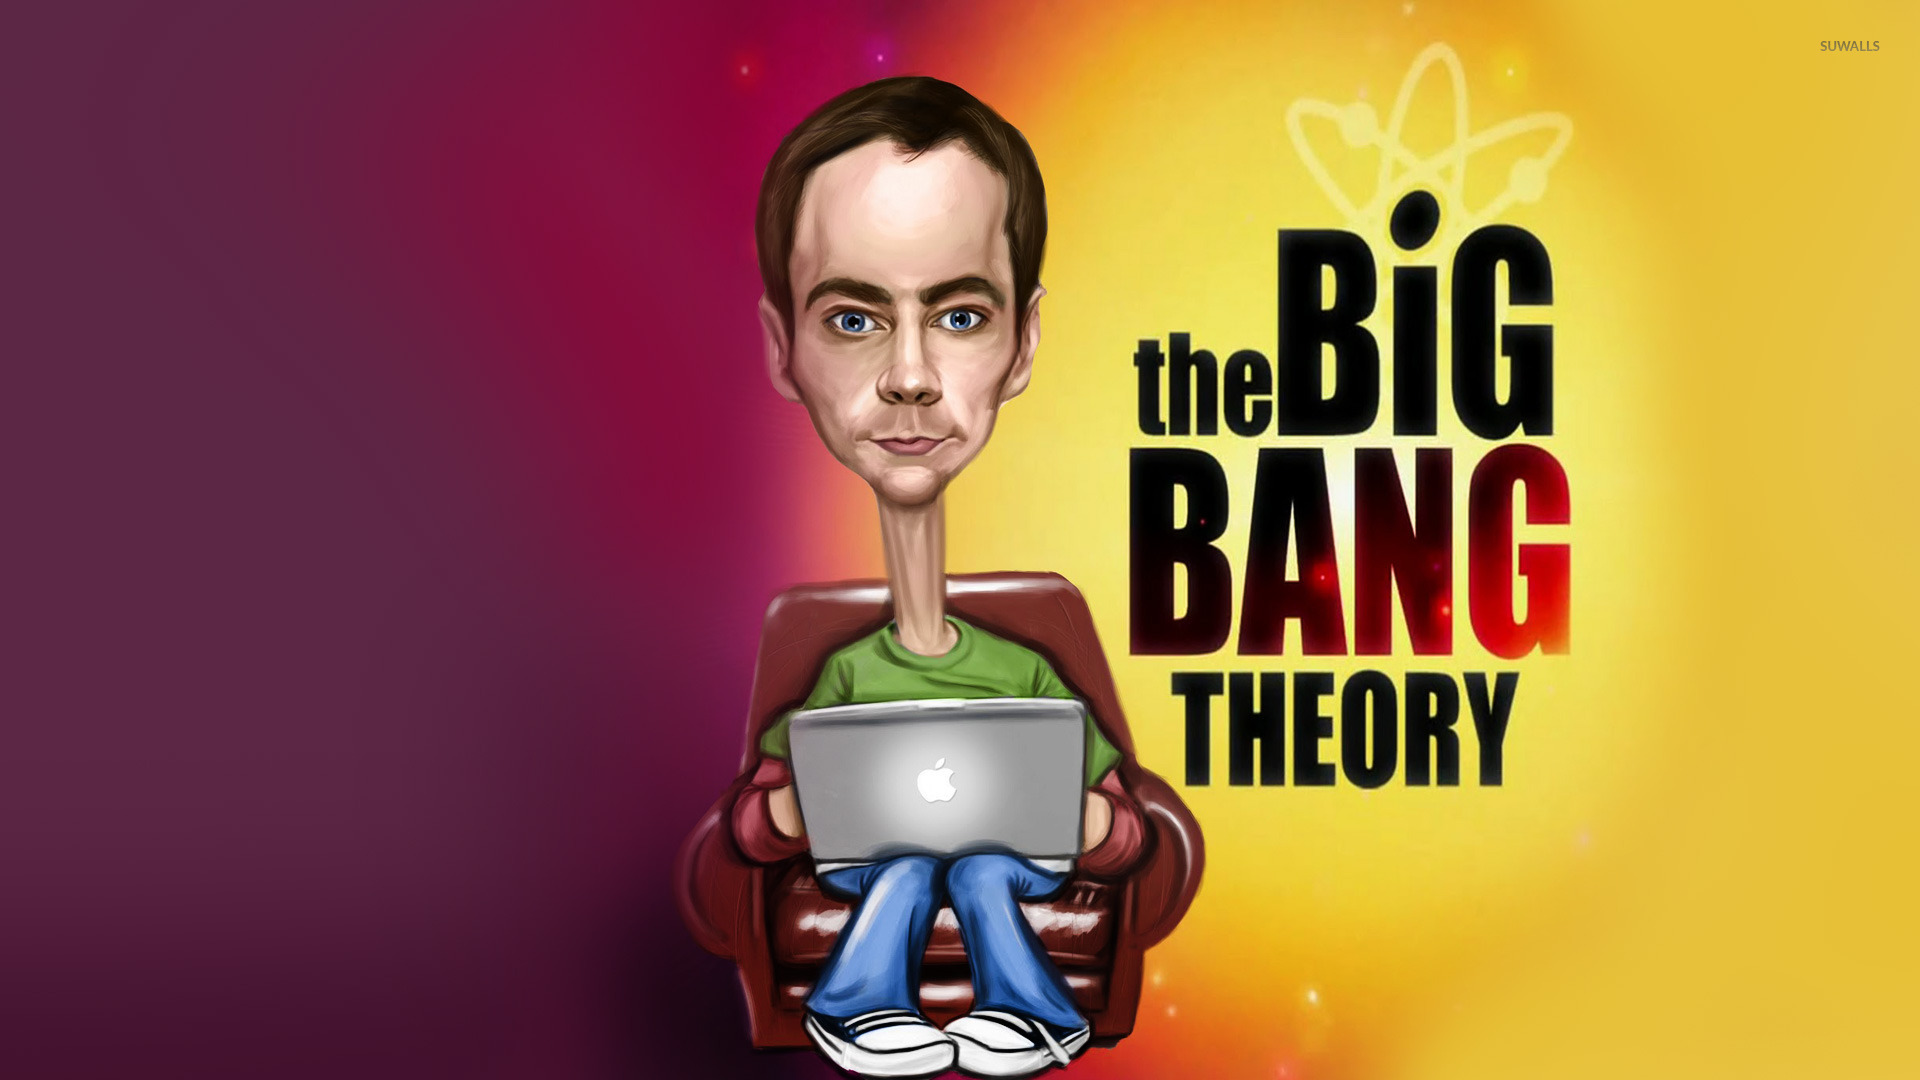 Shannon1982 Image The Big Bang Theory HD Wallpaper And Background